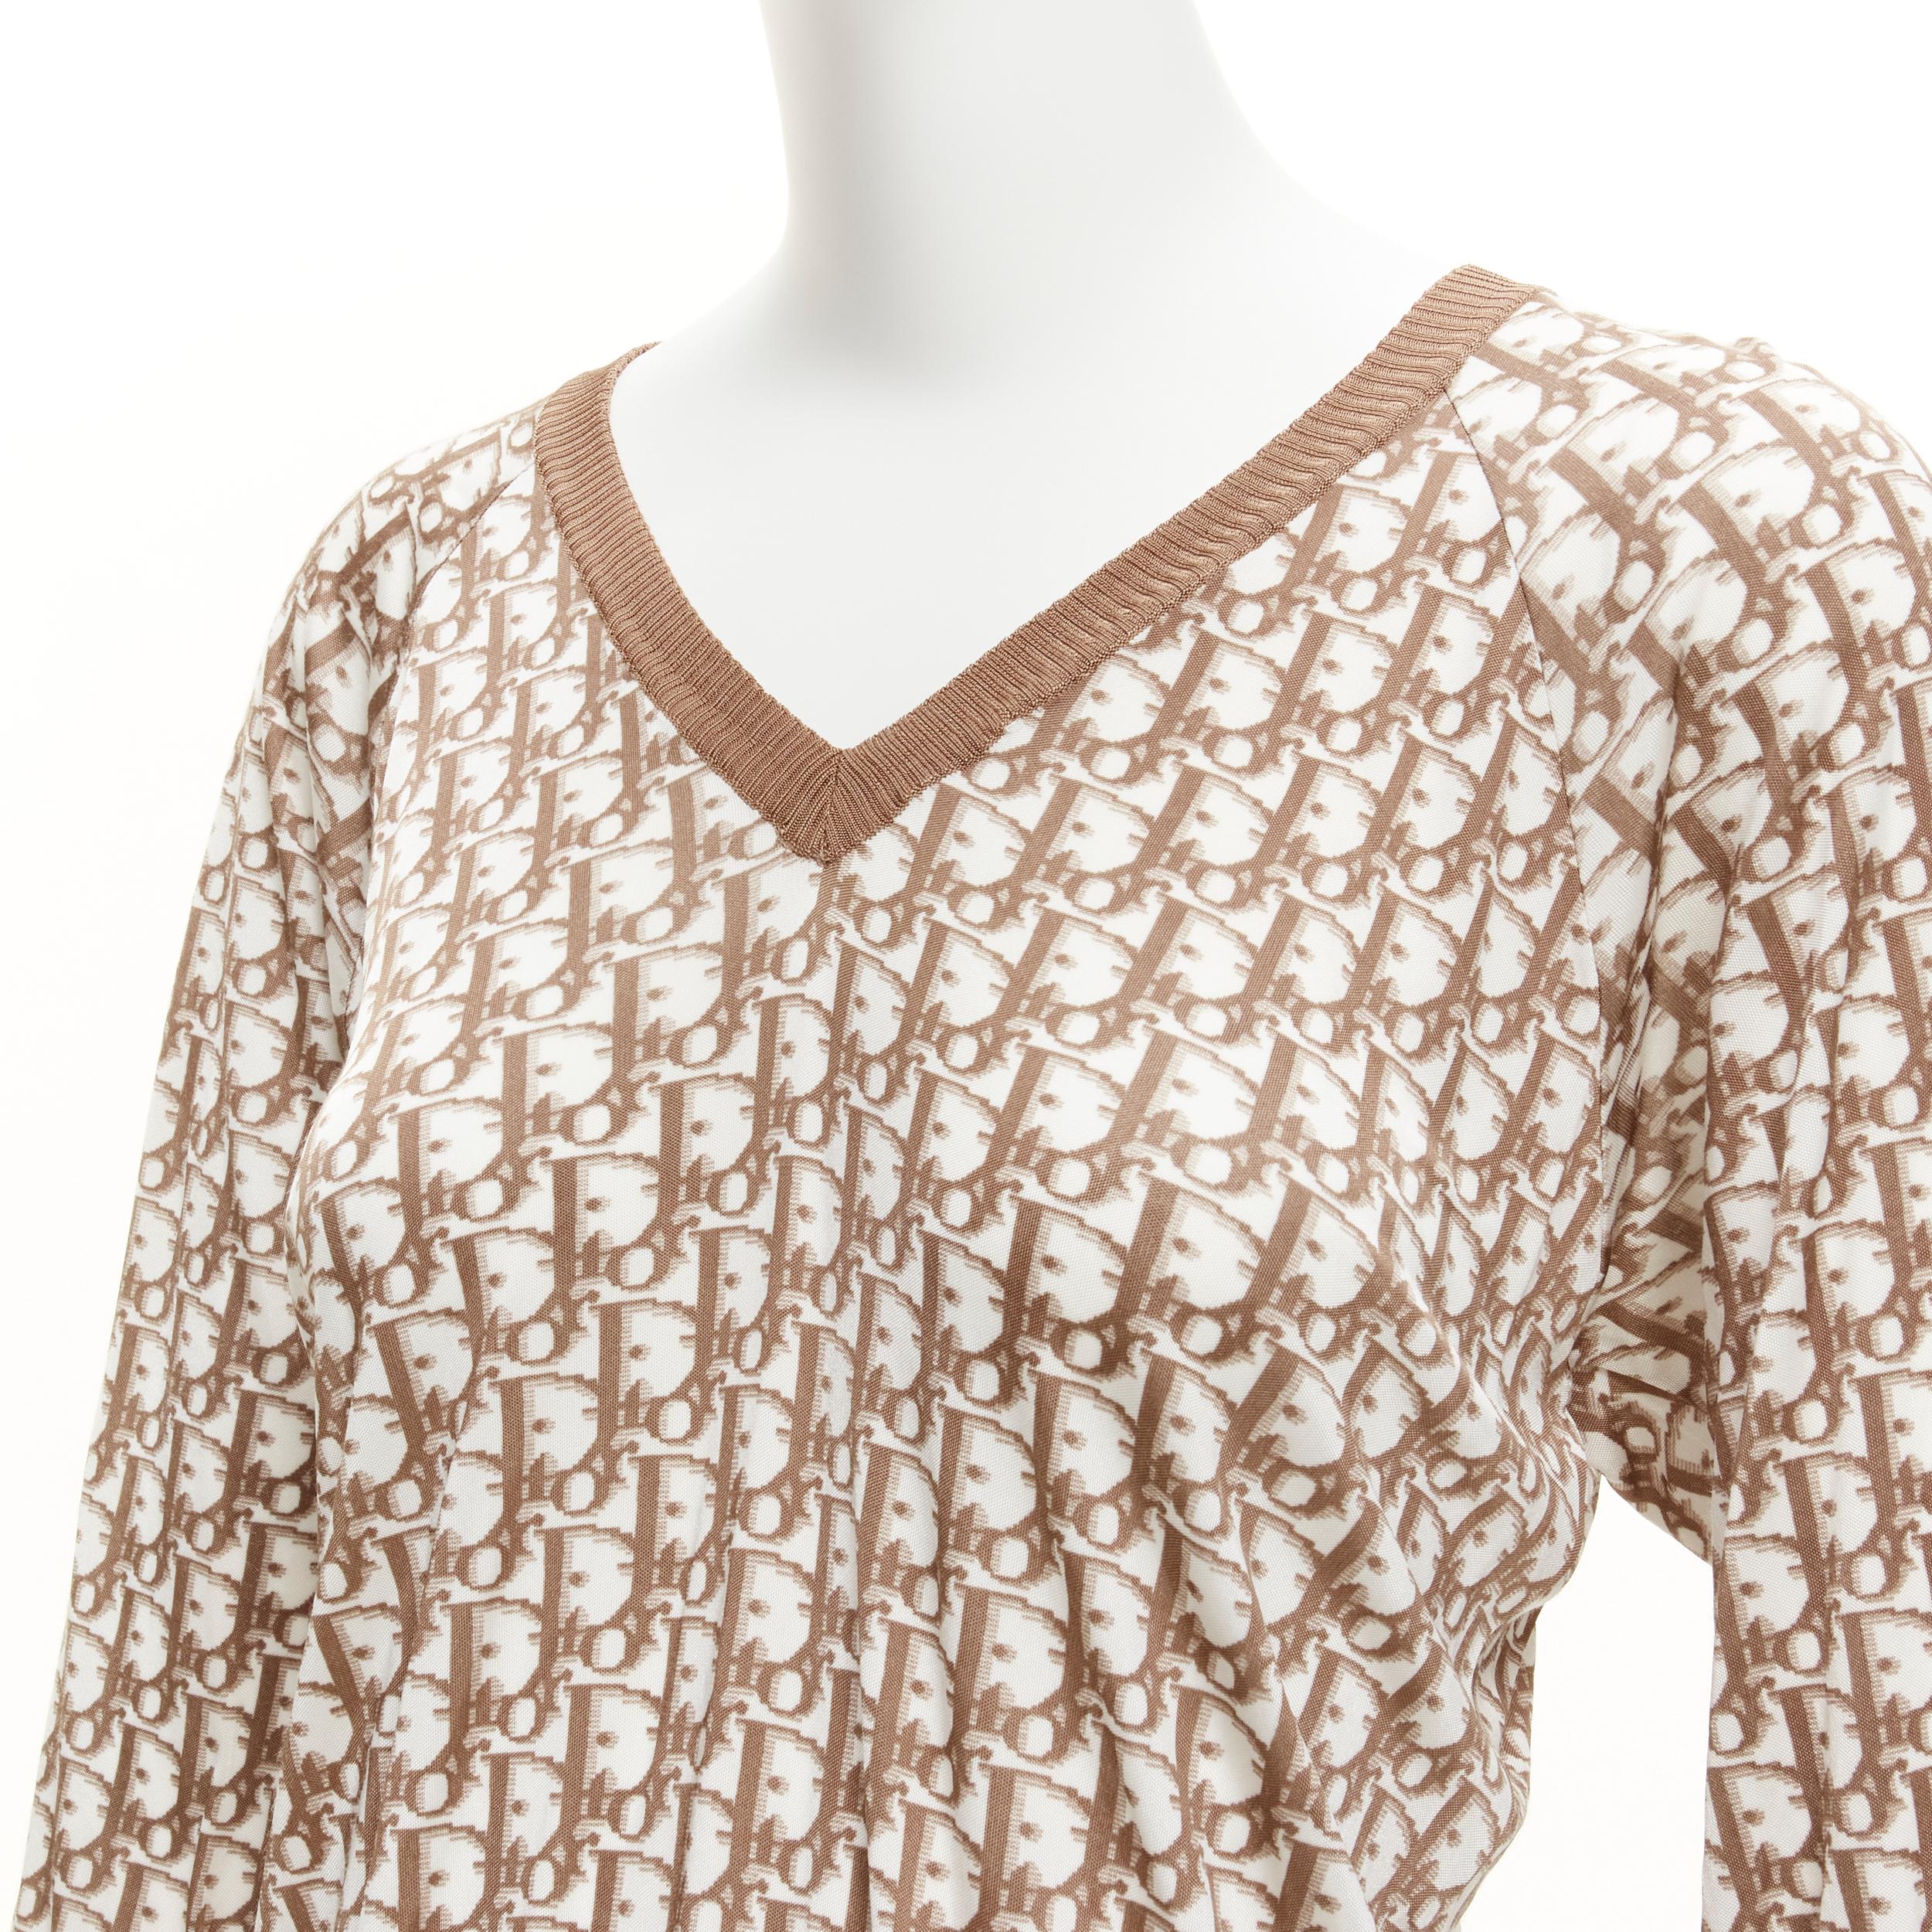 CHRISTIAN DIOR John Galliano 2005 Vintage brown CD trotter monogram sweater FR38 M
Reference: TGAS/D00052
Brand: Christian Dior
Designer: John Galliano
Collection: Spring 2005
Material: Viscose
Color: Bronze, White
Pattern: Monogram
Closure: